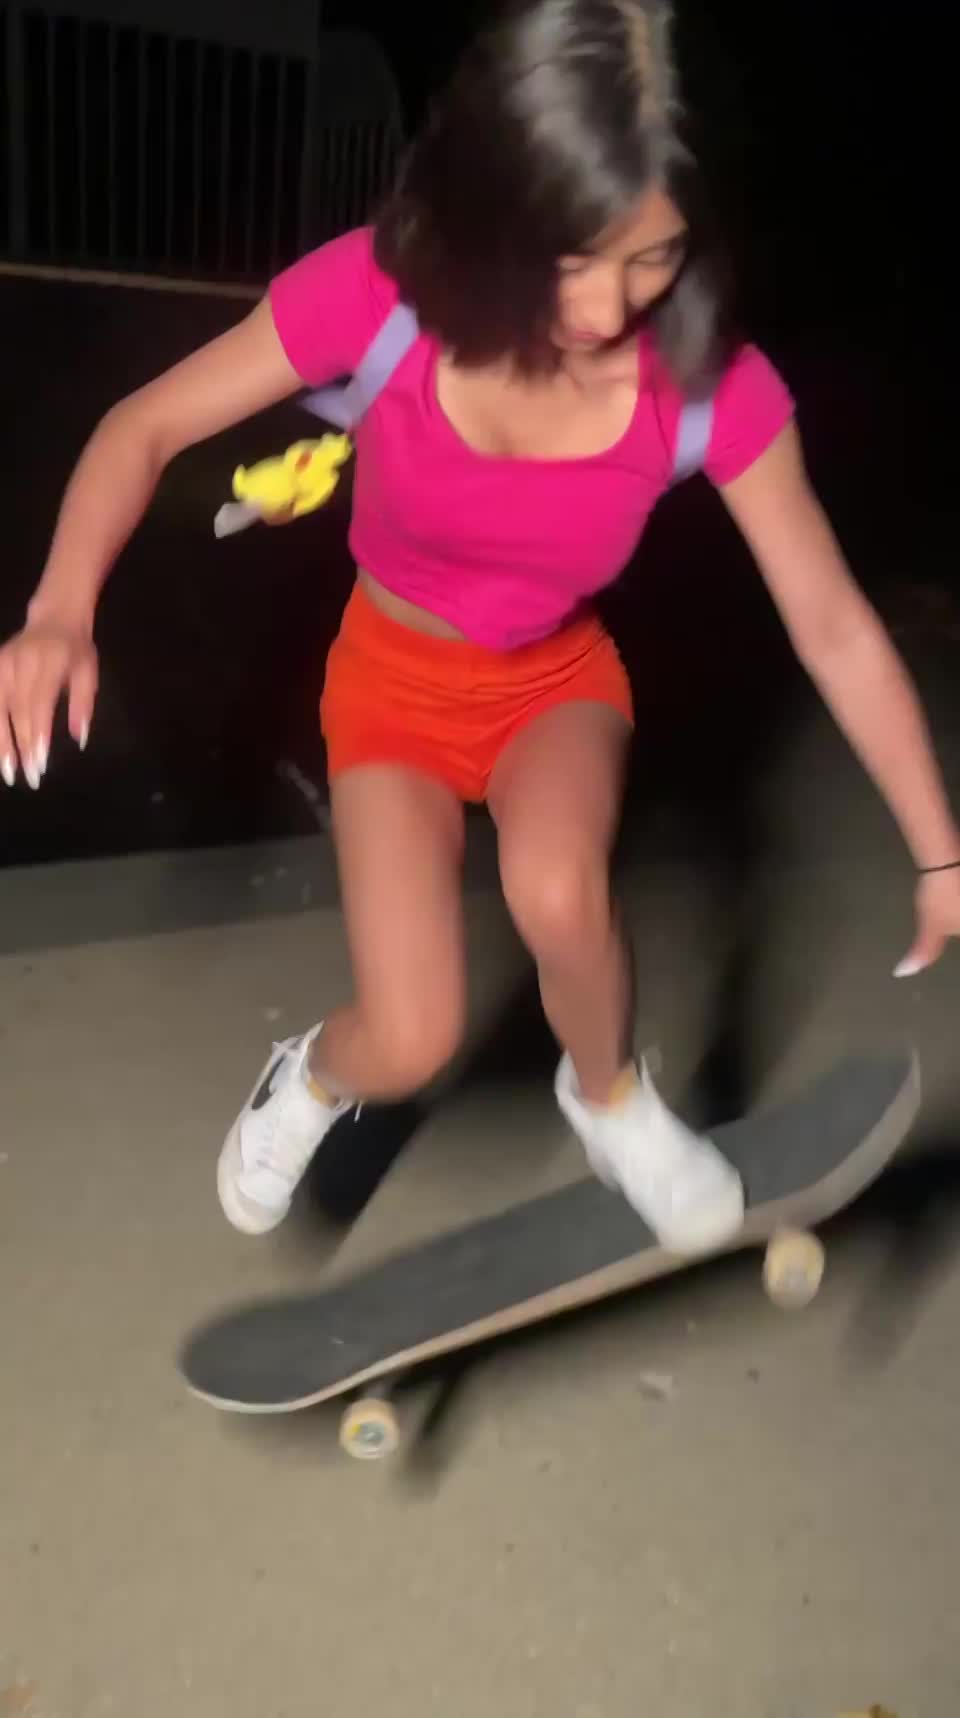 Who skates and flash, Soy Dora! ❤️️ : video clip